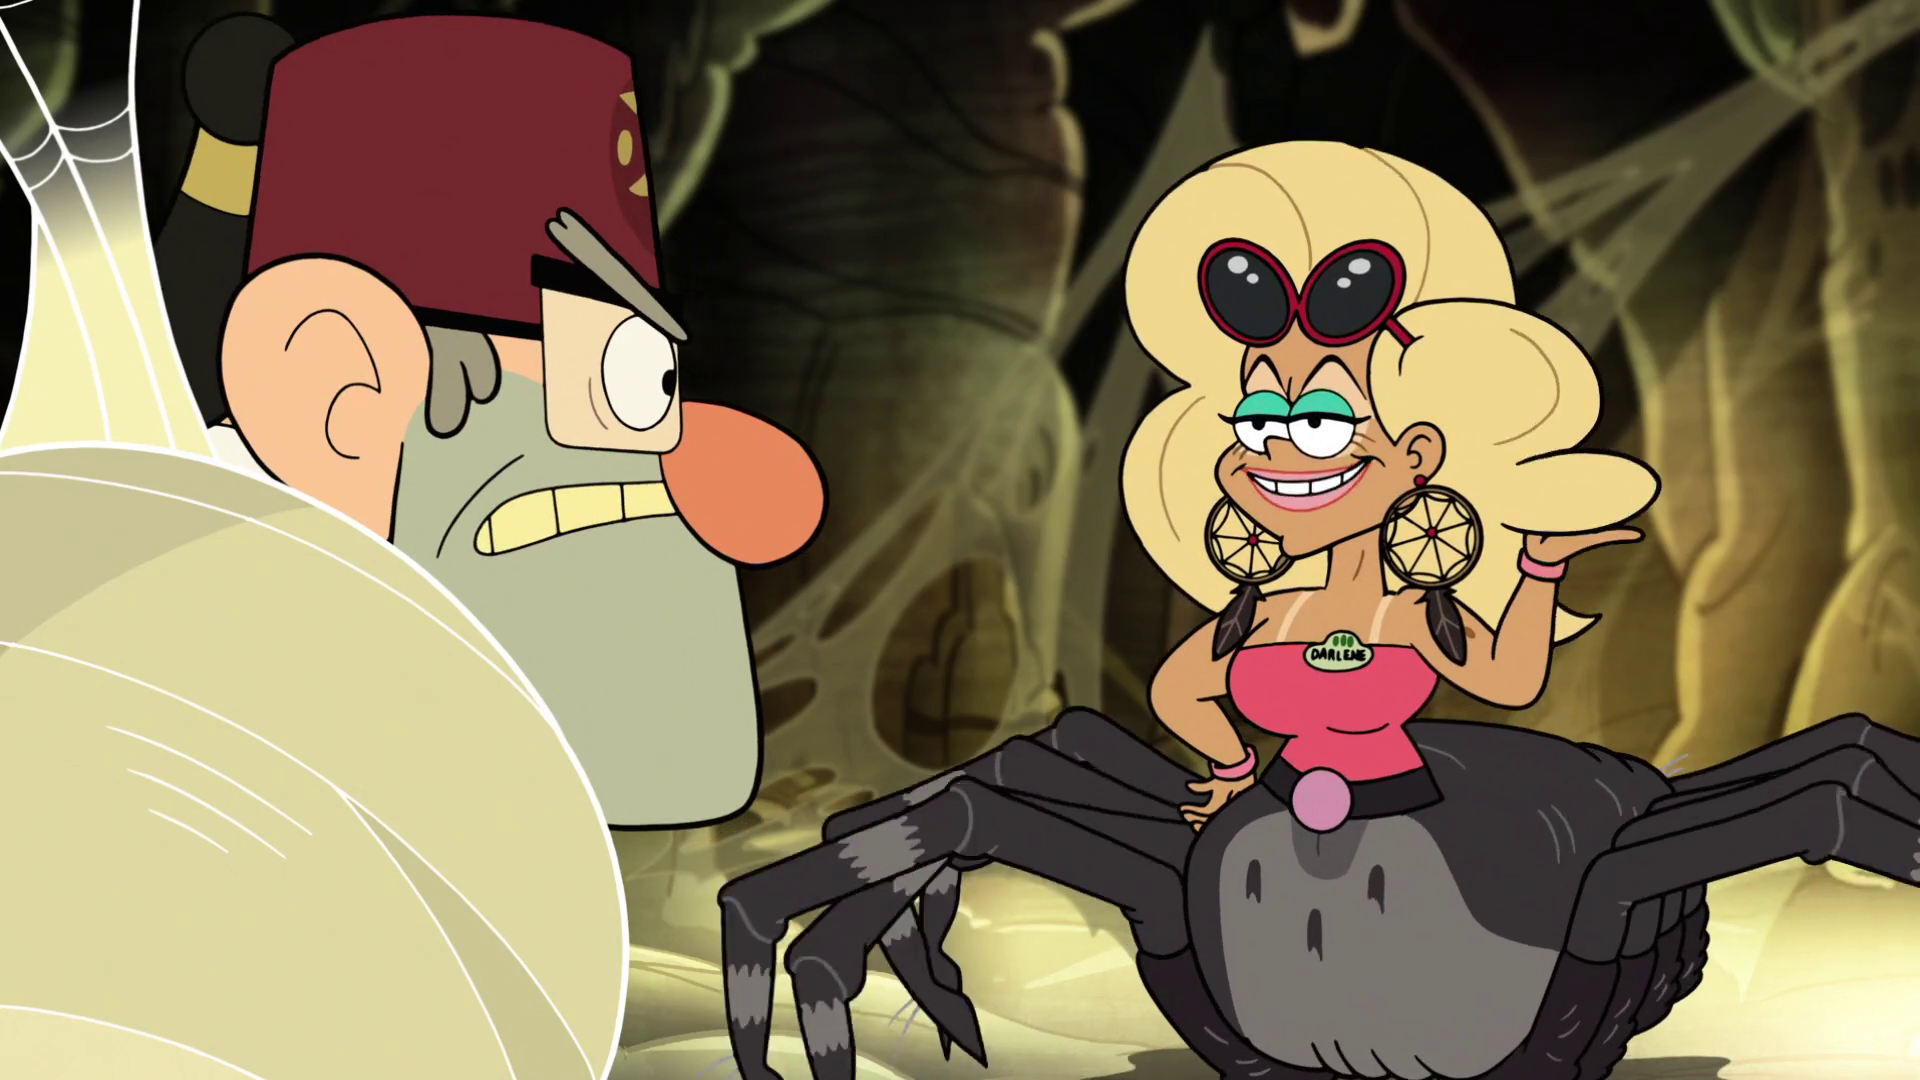 https://static.wikia.nocookie.net/gravityfalls/images/4/4b/S2e16_hot_stuff.png/revision/latest/scale-to-width-down/1920?cb=20170730132512